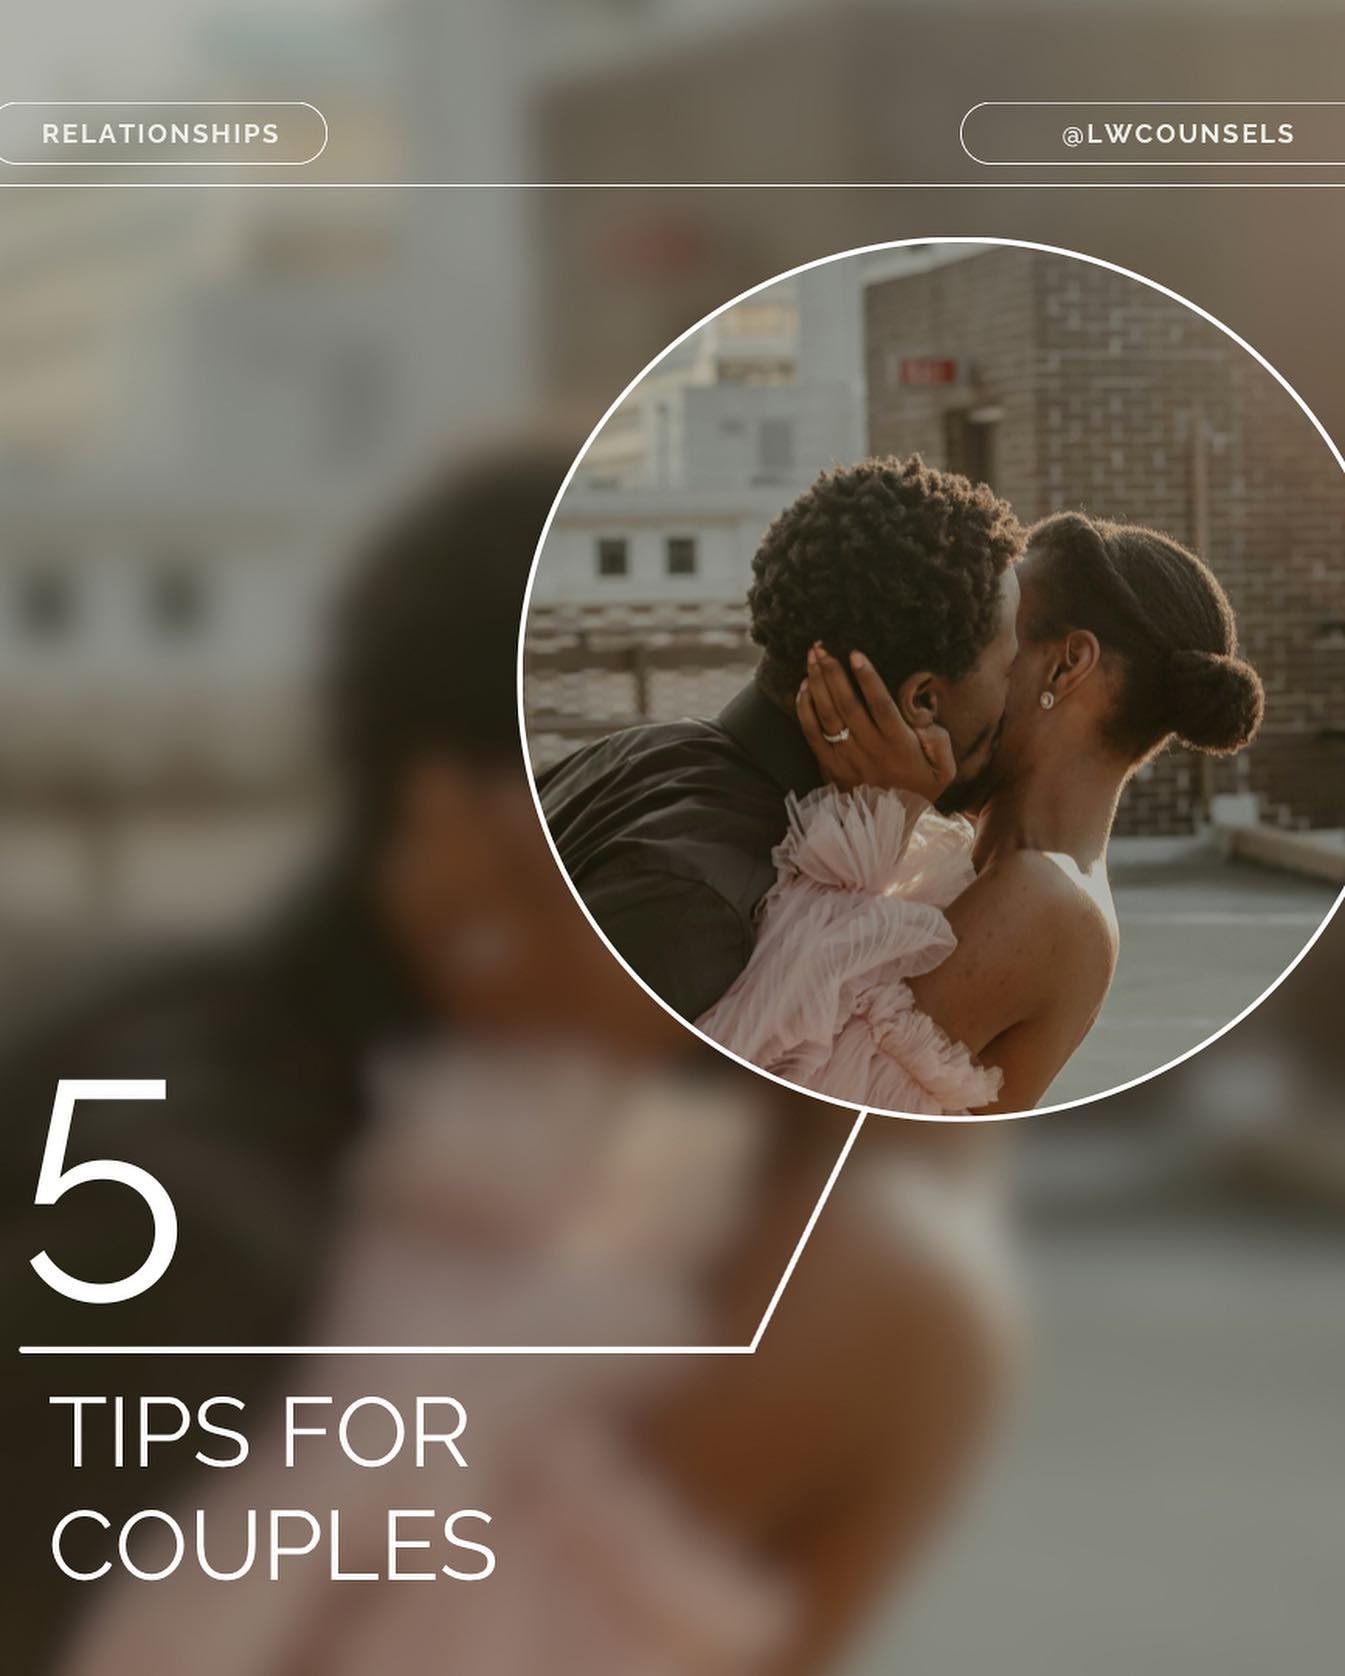 5 Tips for Couples

For couples to grow together in love, an understanding of their relationship goals is necessary. Each partner can only move forward in love and trust with honest and open communication about these shared goals. 

Experience the lo